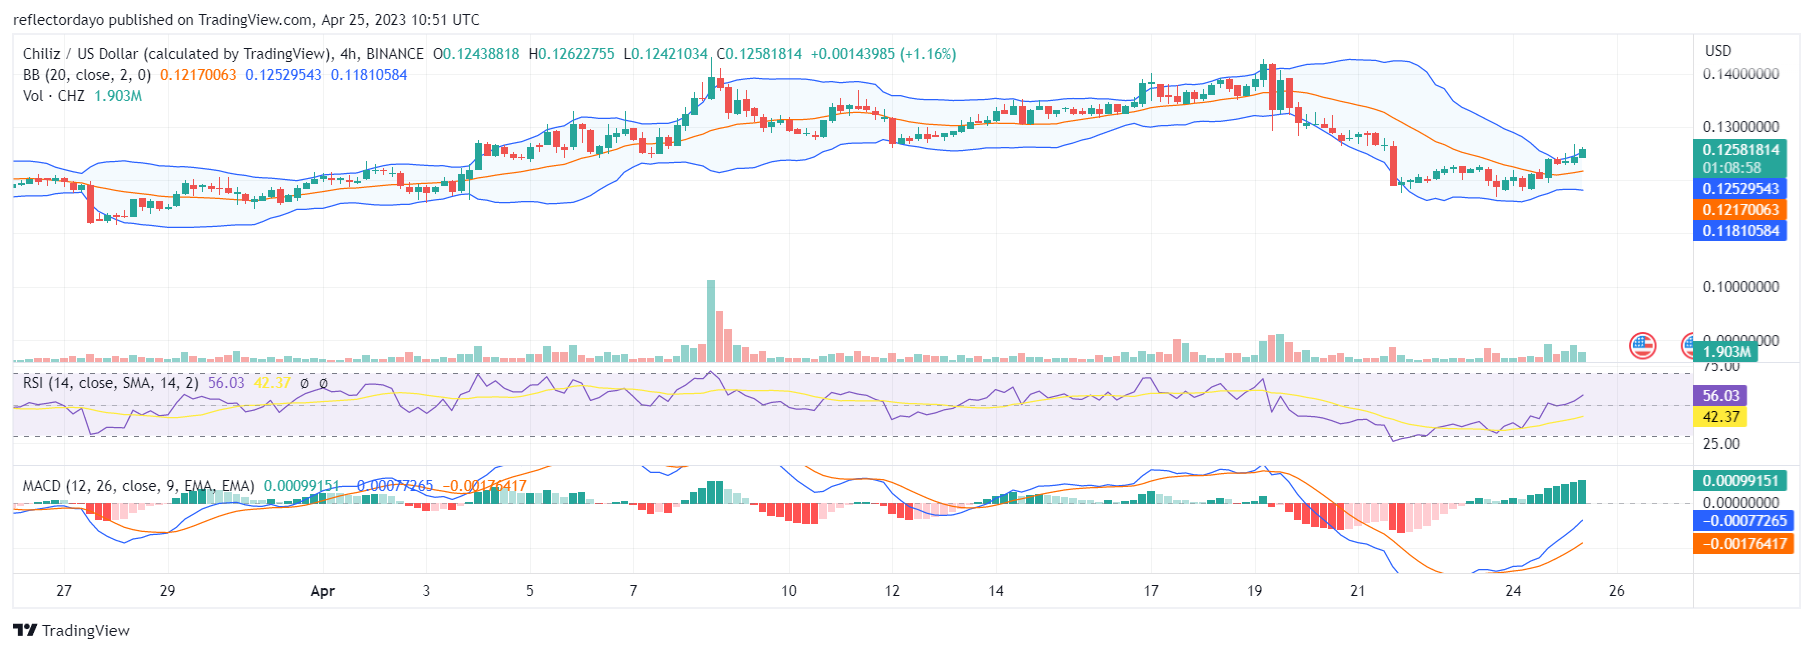 Chiliz (Chz/USD) To Start Trending up From $0.120